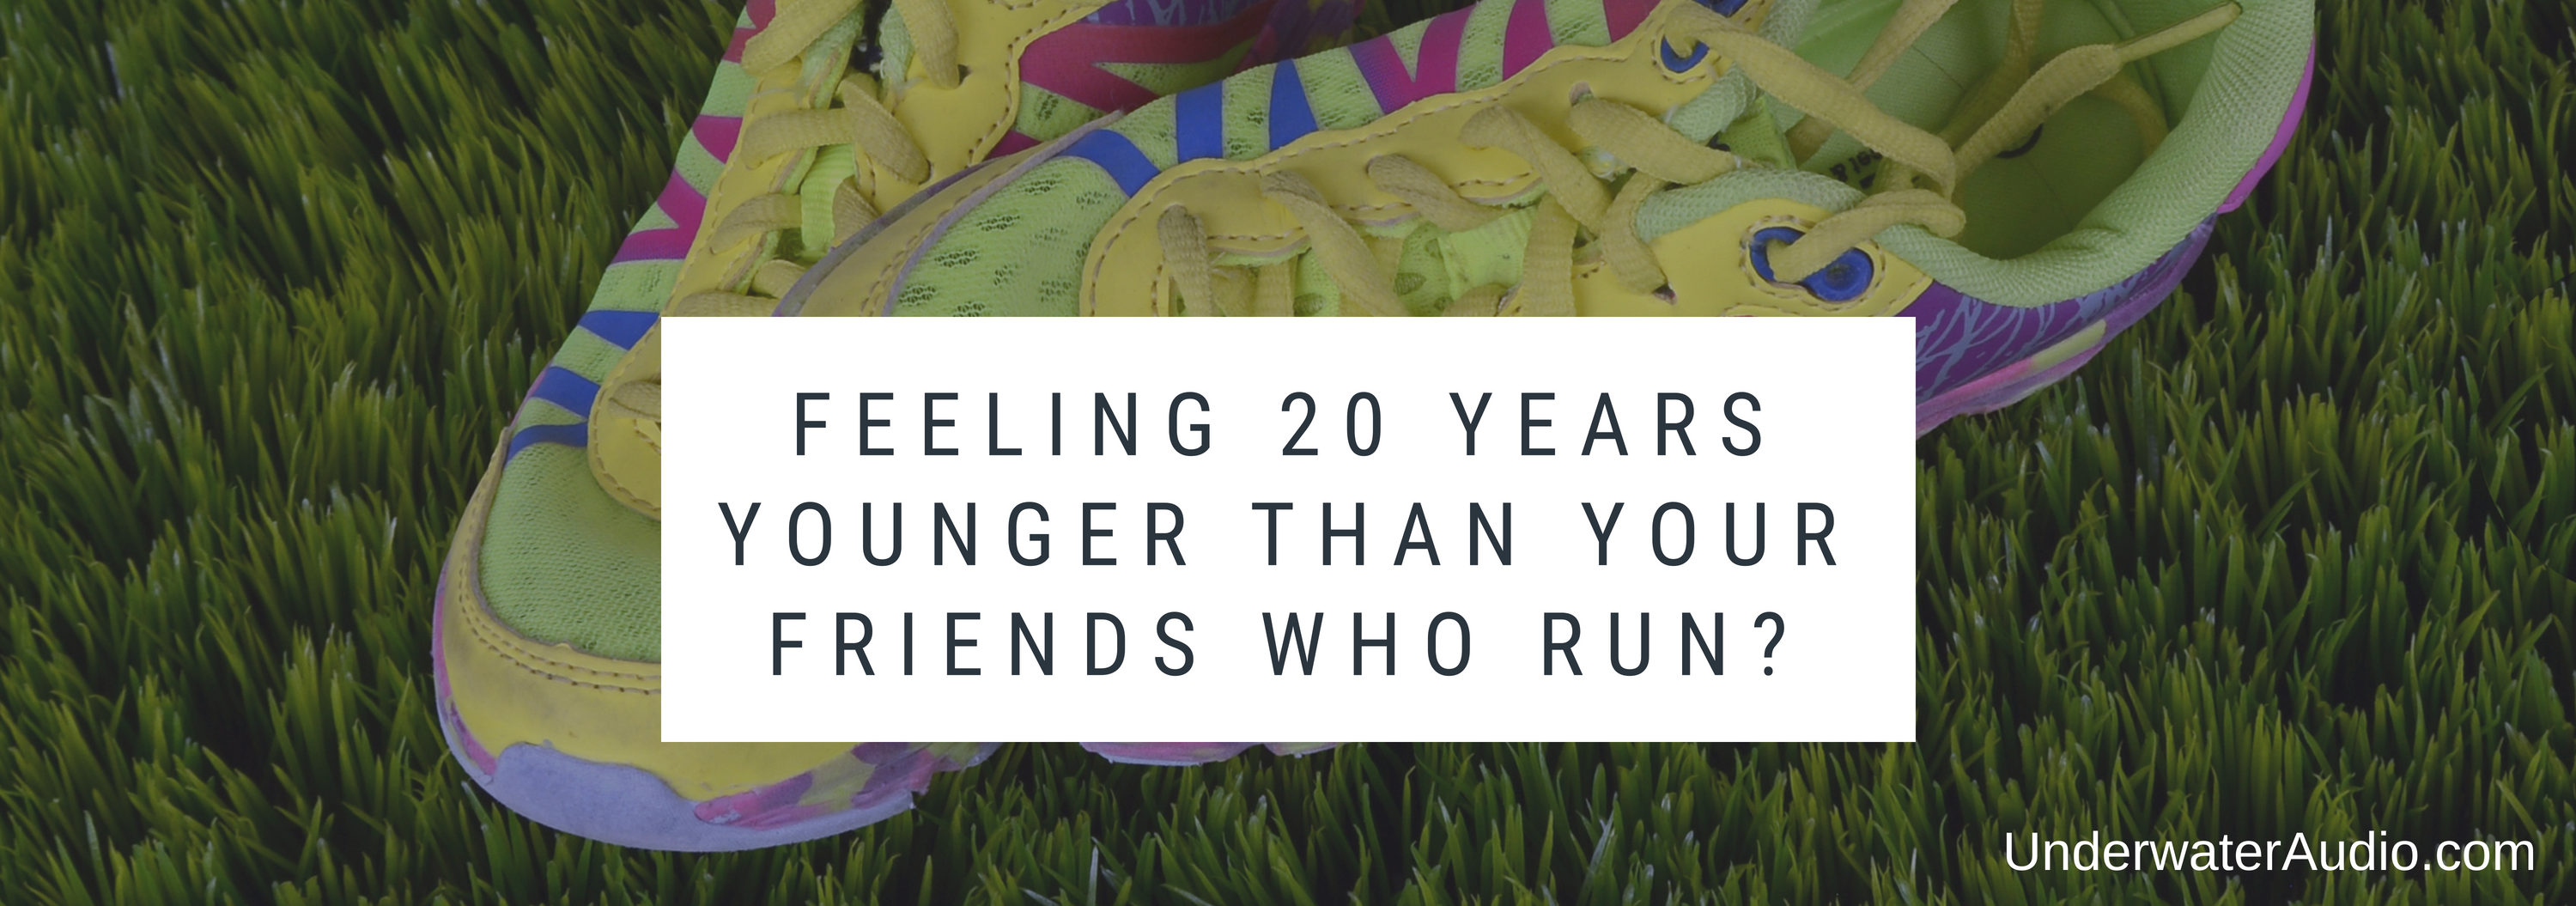 Feeling 20 Years Younger Than Your Friends Who Run?